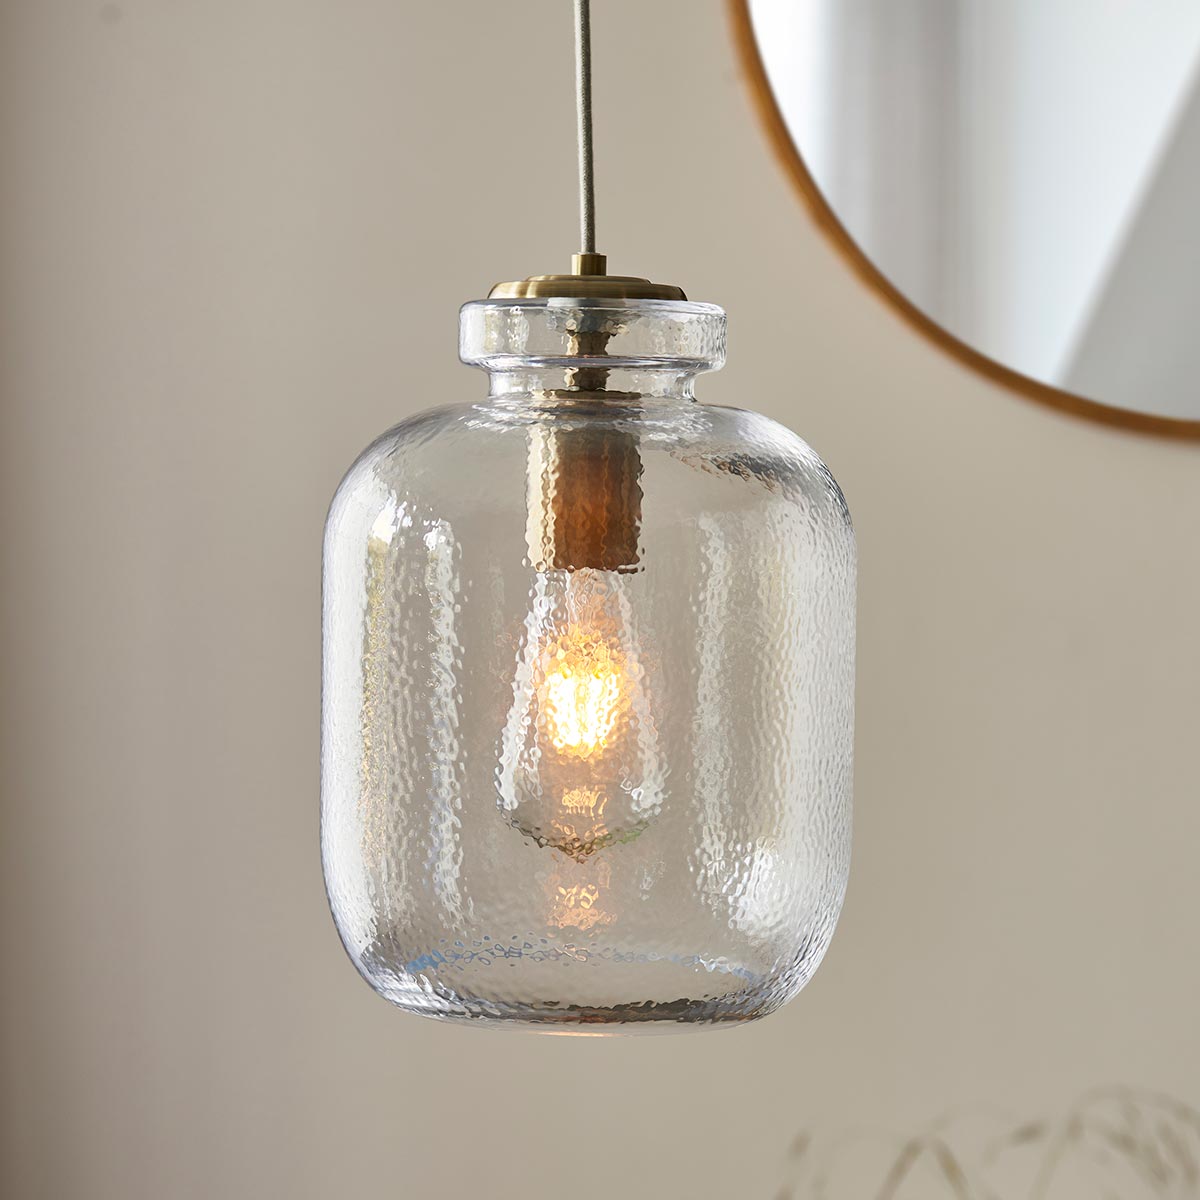 Endon Lyra Classic Small Textured Glass Ceiling Pendant